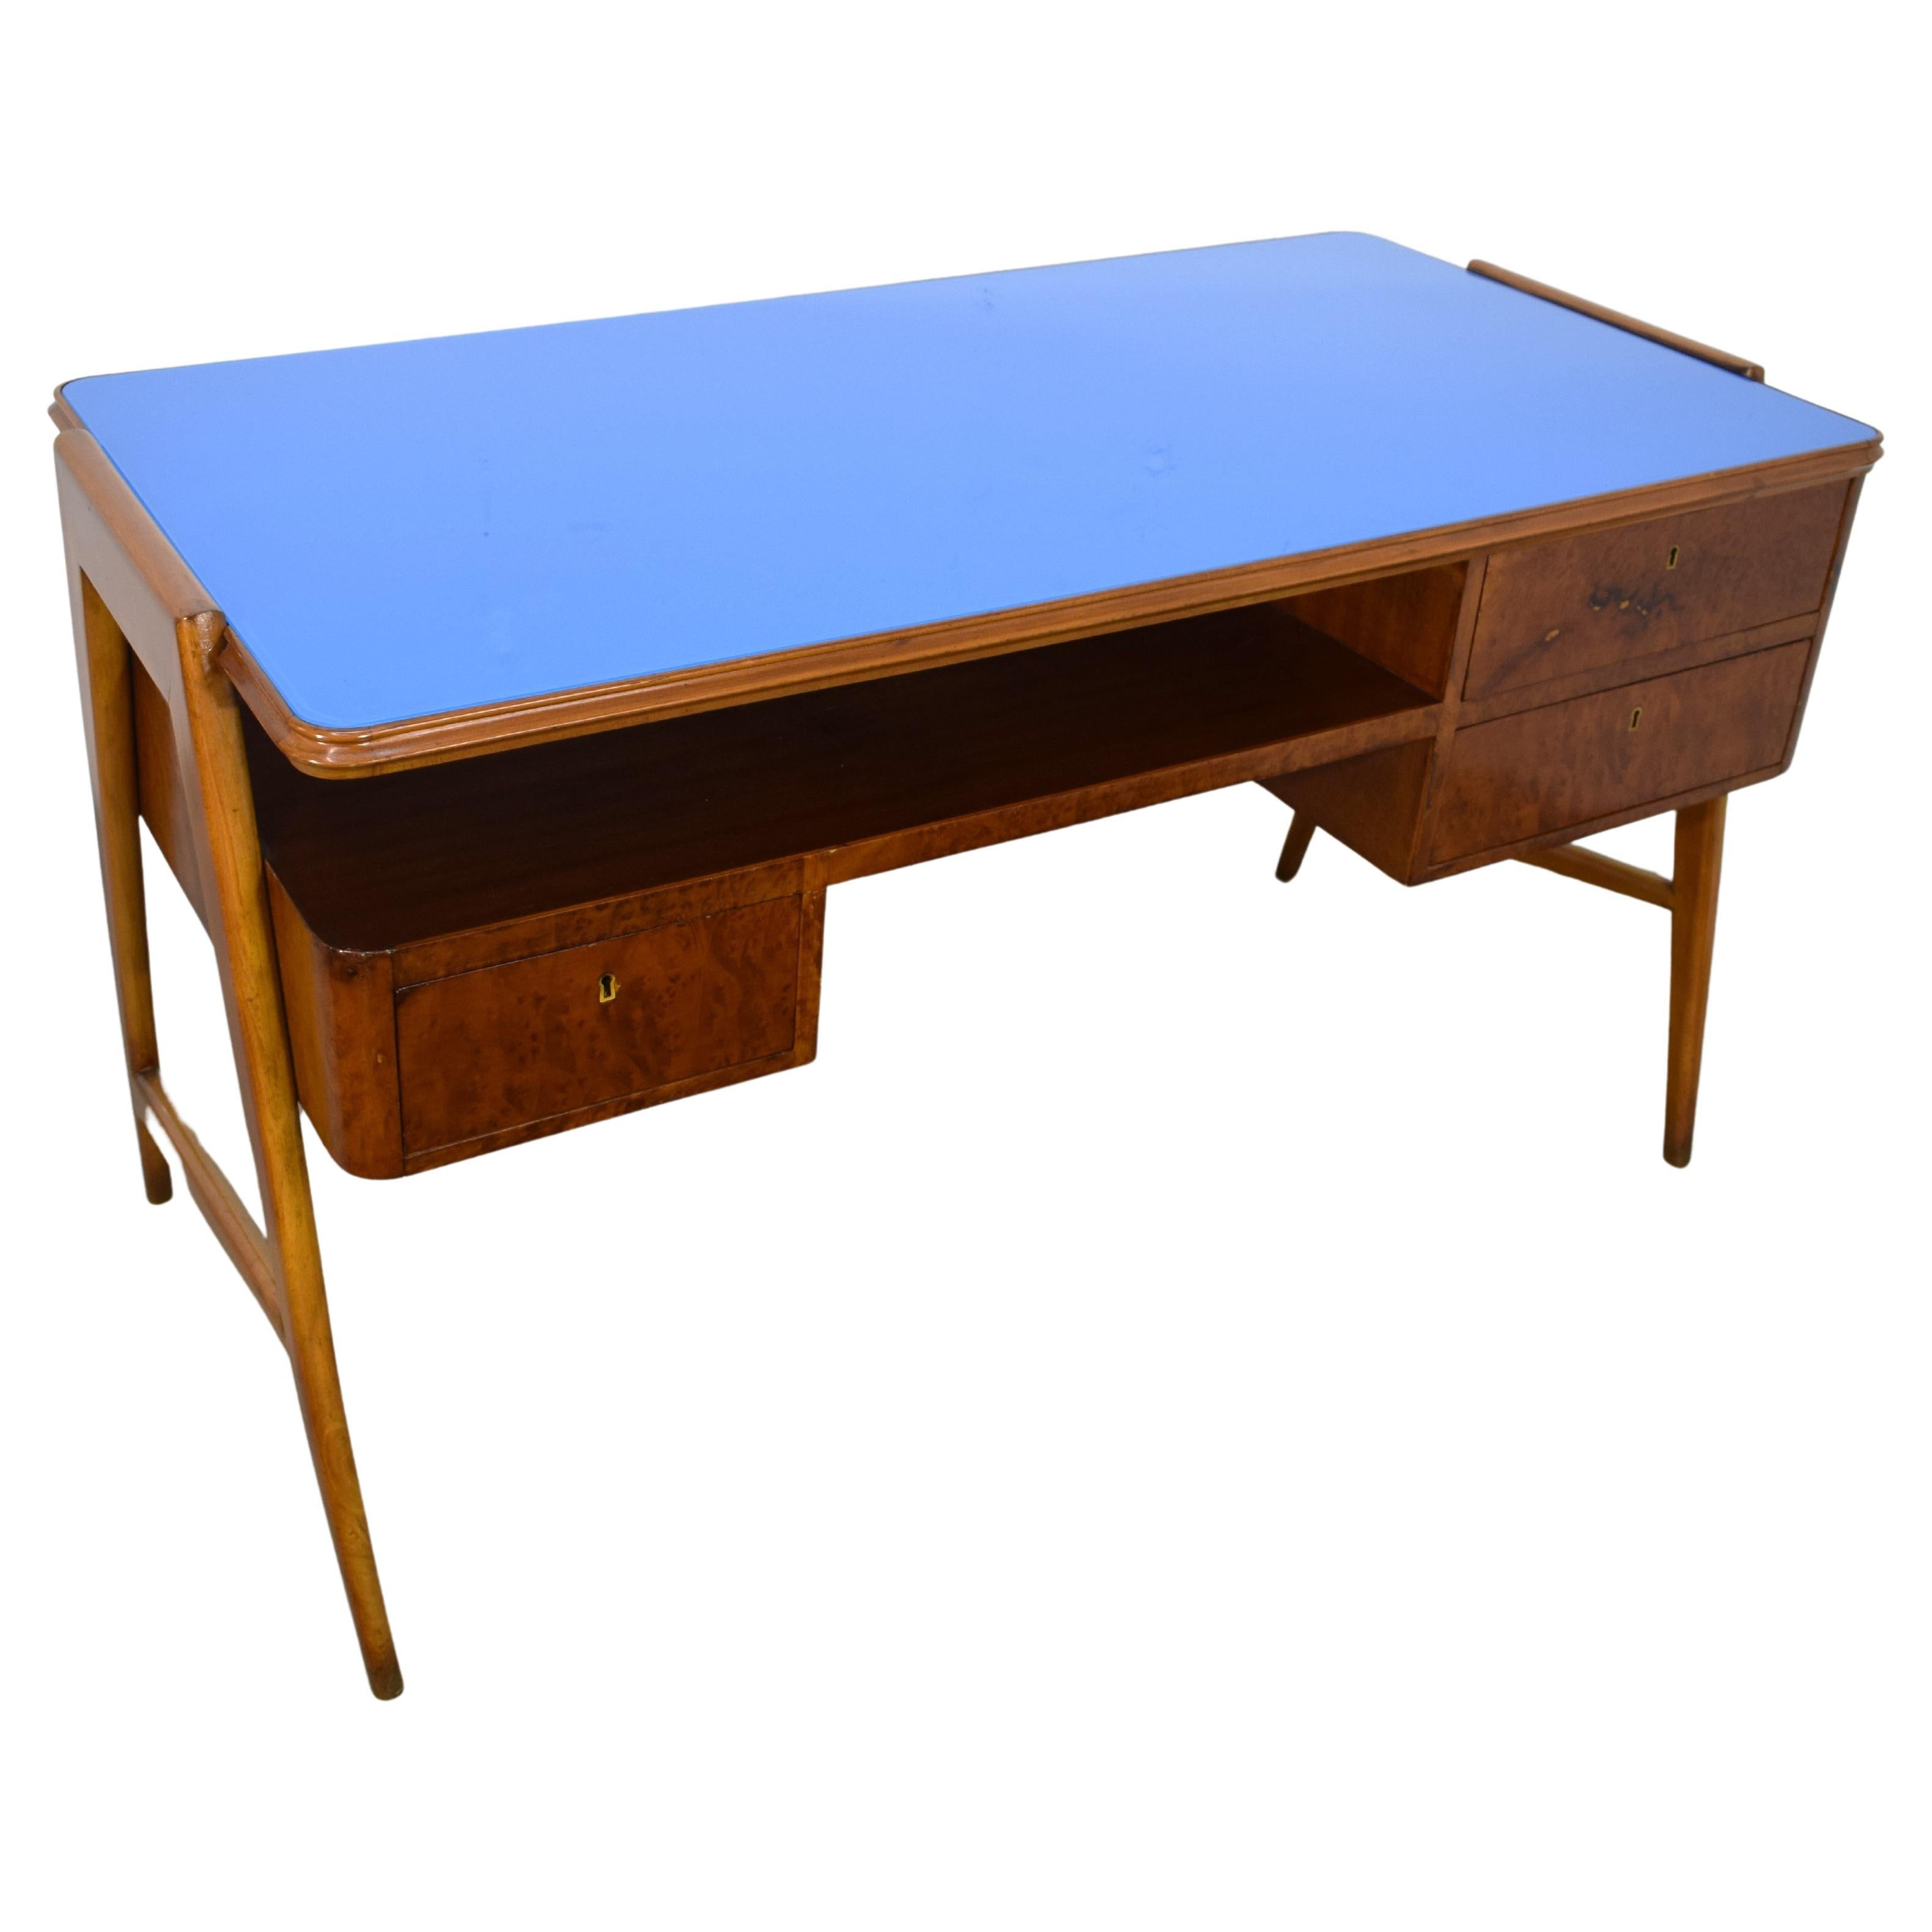 Italian desk, wood and colored glass, 1950s For Sale